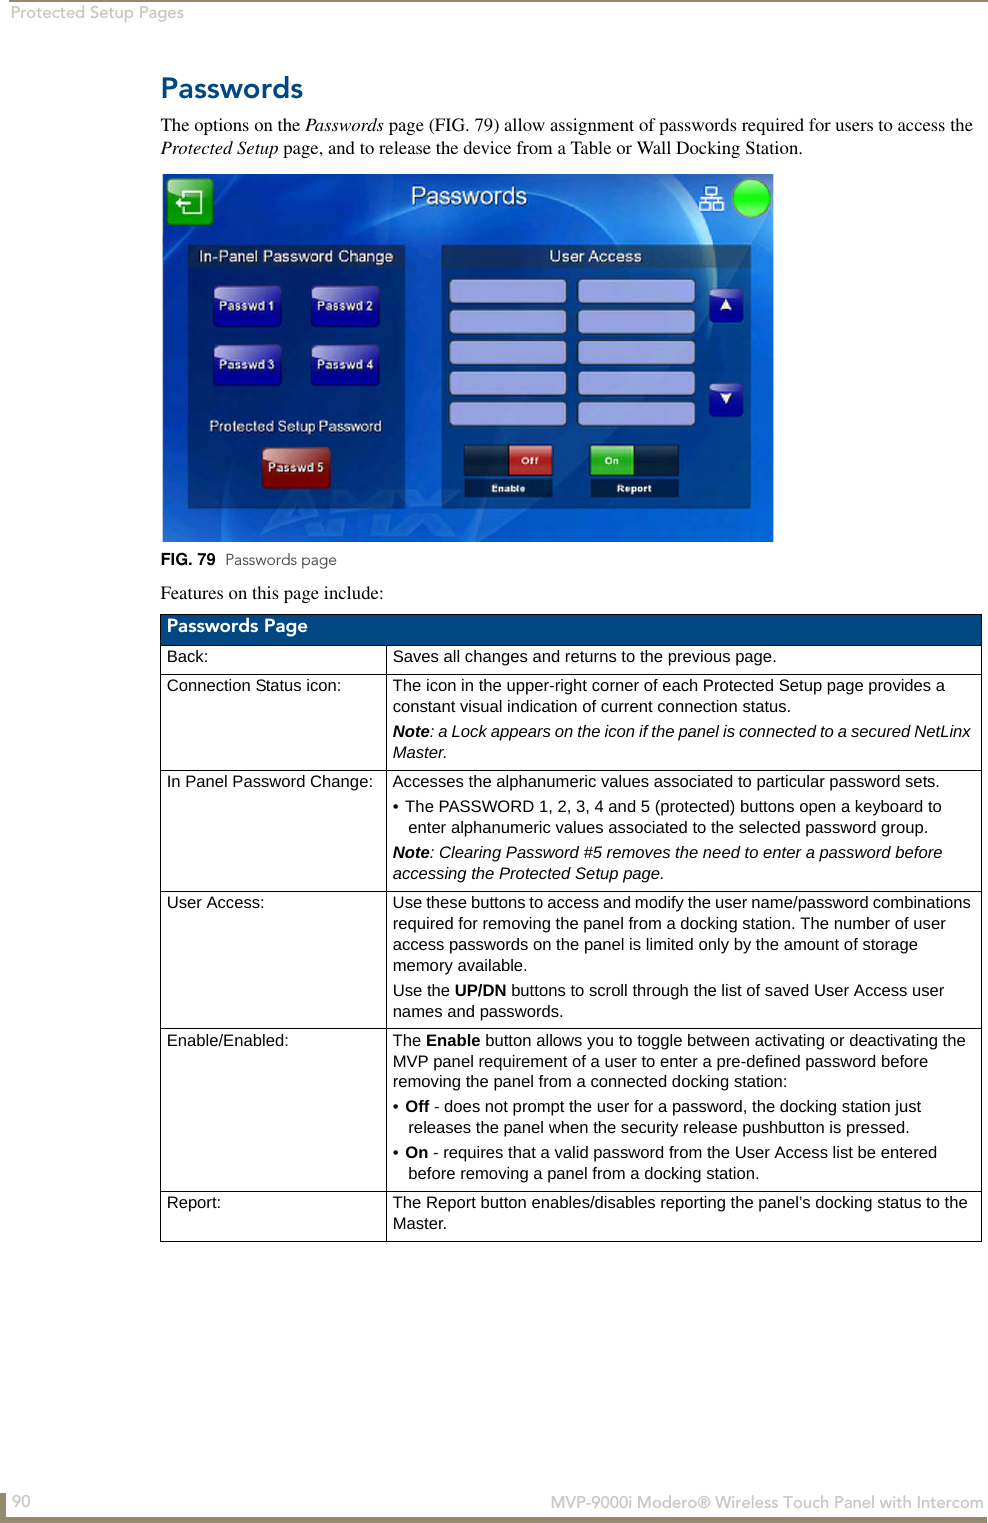 Protected Setup Pages90  MVP-9000i Modero® Wireless Touch Panel with IntercomPasswordsThe options on the Passwords page (FIG. 79) allow assignment of passwords required for users to access the Protected Setup page, and to release the device from a Table or Wall Docking Station.Features on this page include:FIG. 79  Passwords pagePasswords Page Back: Saves all changes and returns to the previous page.Connection Status icon: The icon in the upper-right corner of each Protected Setup page provides a constant visual indication of current connection status.Note: a Lock appears on the icon if the panel is connected to a secured NetLinx Master.In Panel Password Change: Accesses the alphanumeric values associated to particular password sets.• The PASSWORD 1, 2, 3, 4 and 5 (protected) buttons open a keyboard to enter alphanumeric values associated to the selected password group.Note: Clearing Password #5 removes the need to enter a password before accessing the Protected Setup page.User Access: Use these buttons to access and modify the user name/password combinations required for removing the panel from a docking station. The number of user access passwords on the panel is limited only by the amount of storage memory available.Use the UP/DN buttons to scroll through the list of saved User Access user names and passwords.Enable/Enabled: The Enable button allows you to toggle between activating or deactivating the MVP panel requirement of a user to enter a pre-defined password before removing the panel from a connected docking station:•Off - does not prompt the user for a password, the docking station just releases the panel when the security release pushbutton is pressed.•On - requires that a valid password from the User Access list be entered before removing a panel from a docking station.Report: The Report button enables/disables reporting the panel’s docking status to the Master.